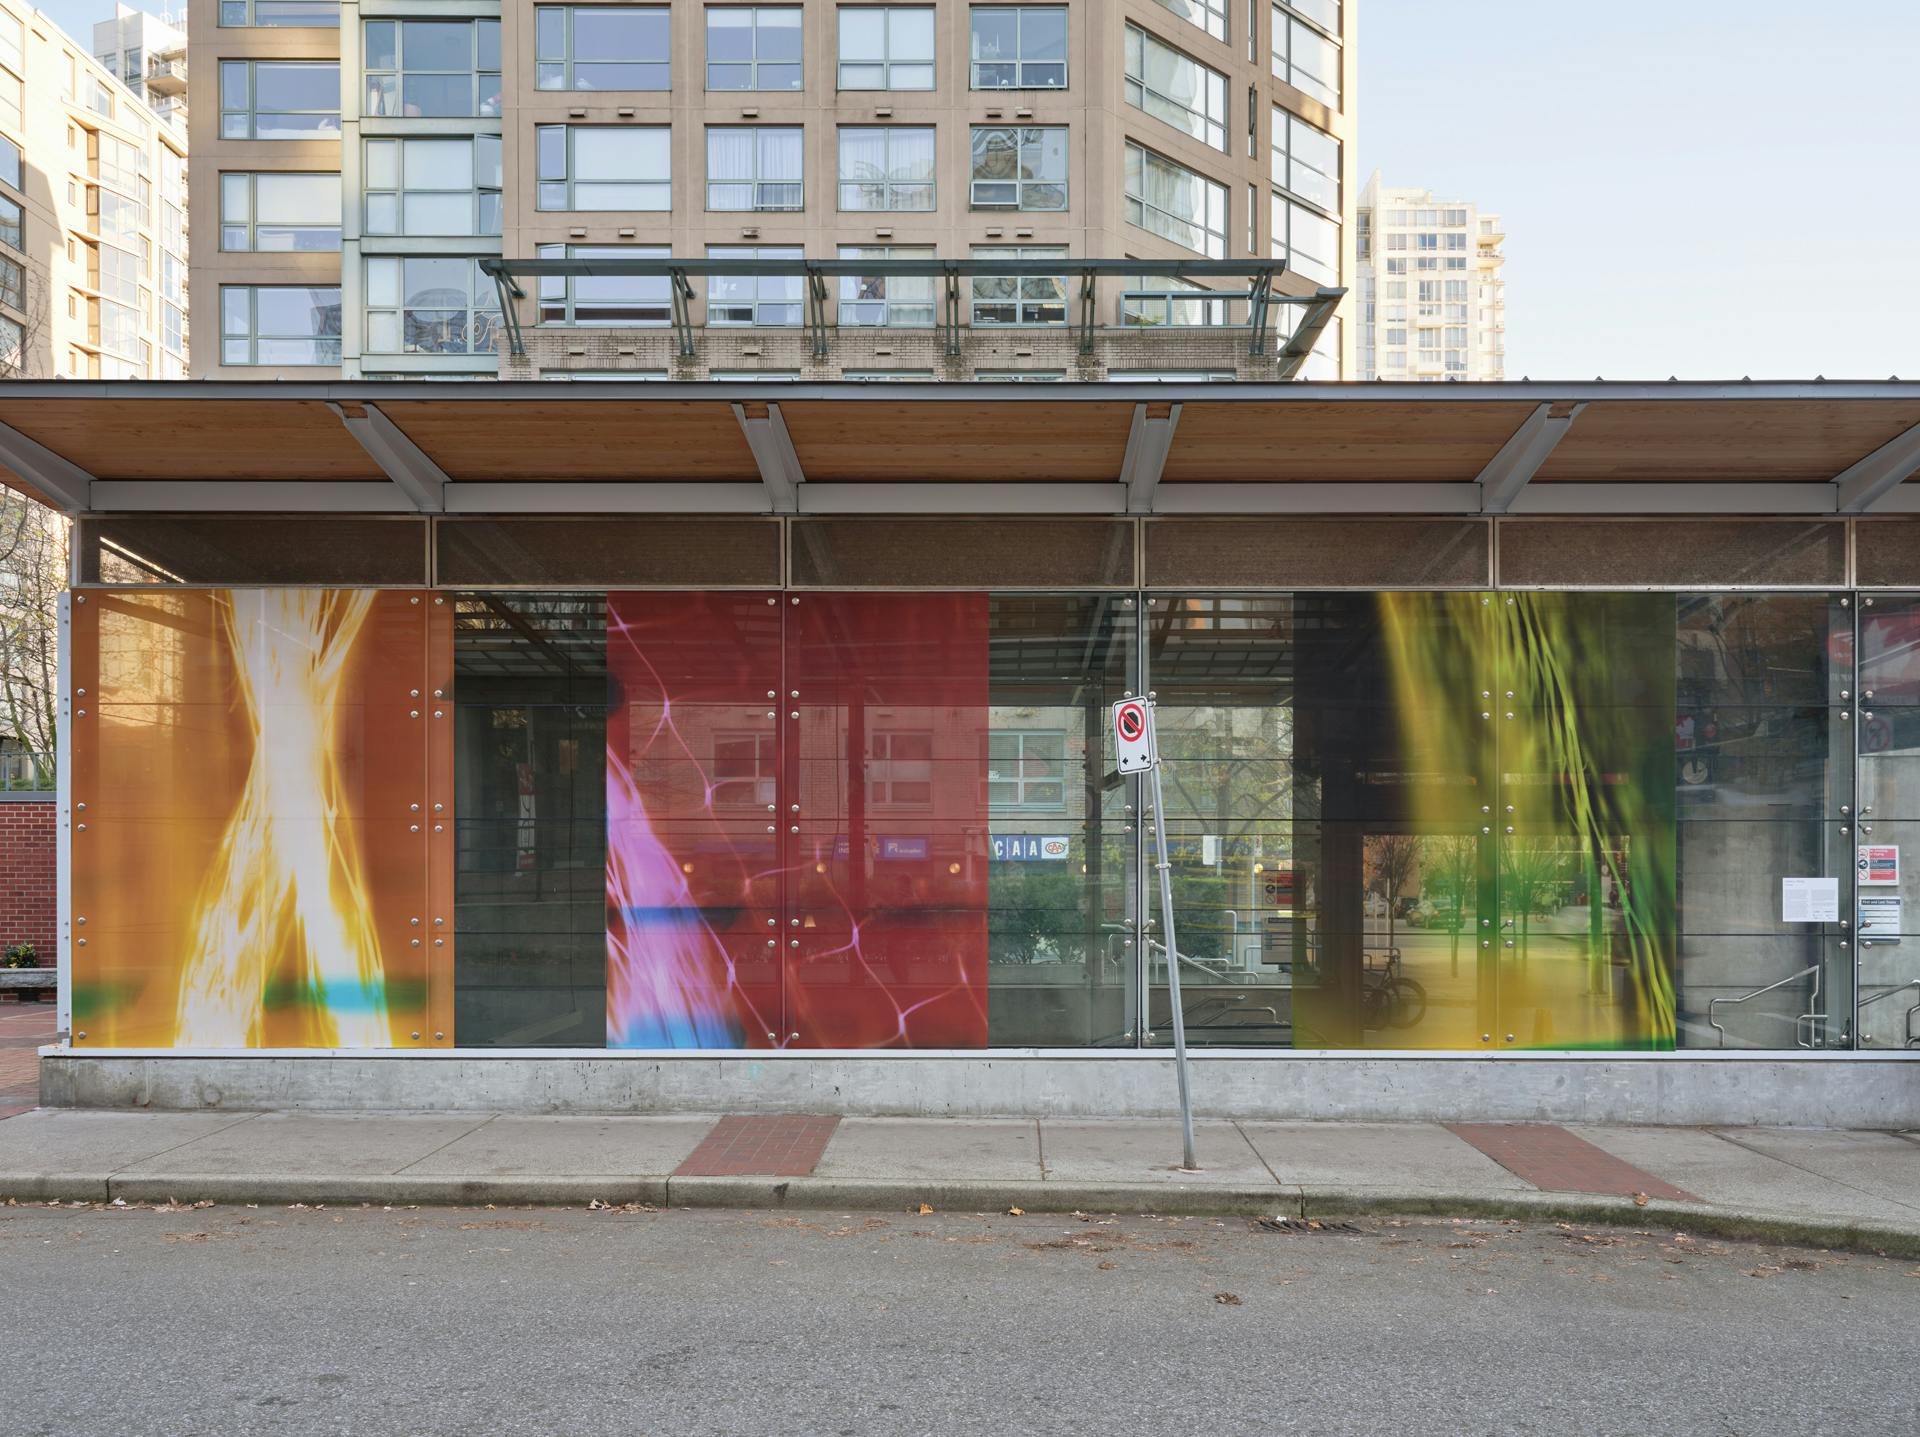 "A frontal view of a SkyTrain station with three photograms in its windows depicting mesh nylon bags against neon photographic paper. The left photogram resembles an orange X. The centre is red and pink. The right photogram is green and yellow "